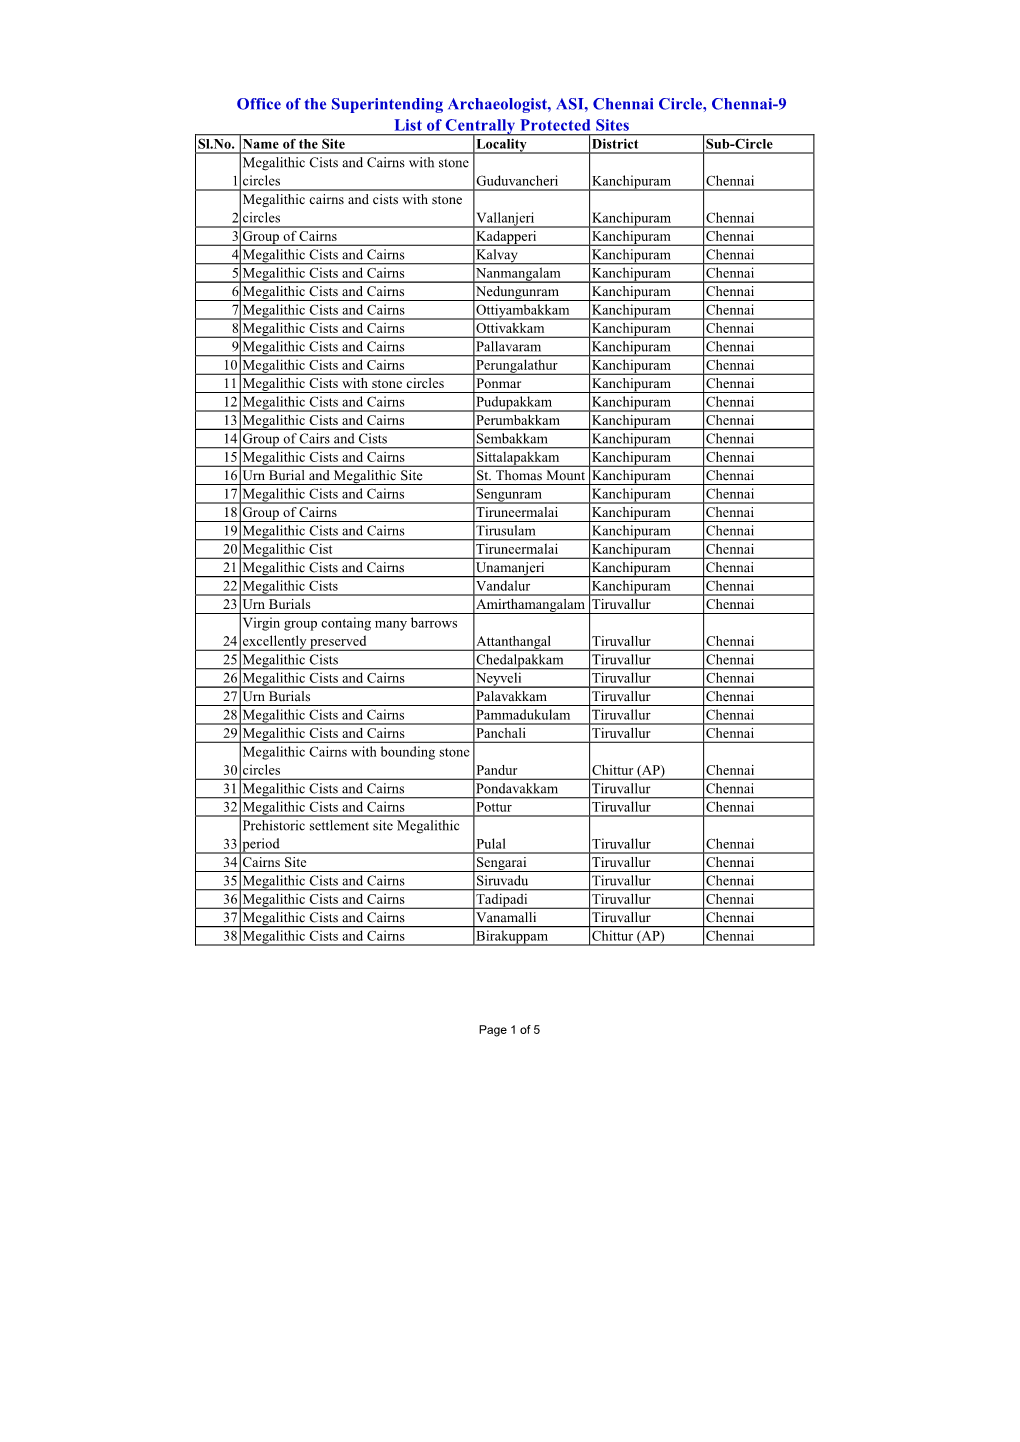 Office of the Superintending Archaeologist, ASI, Chennai Circle, Chennai-9 List of Centrally Protected Sites Sl.No